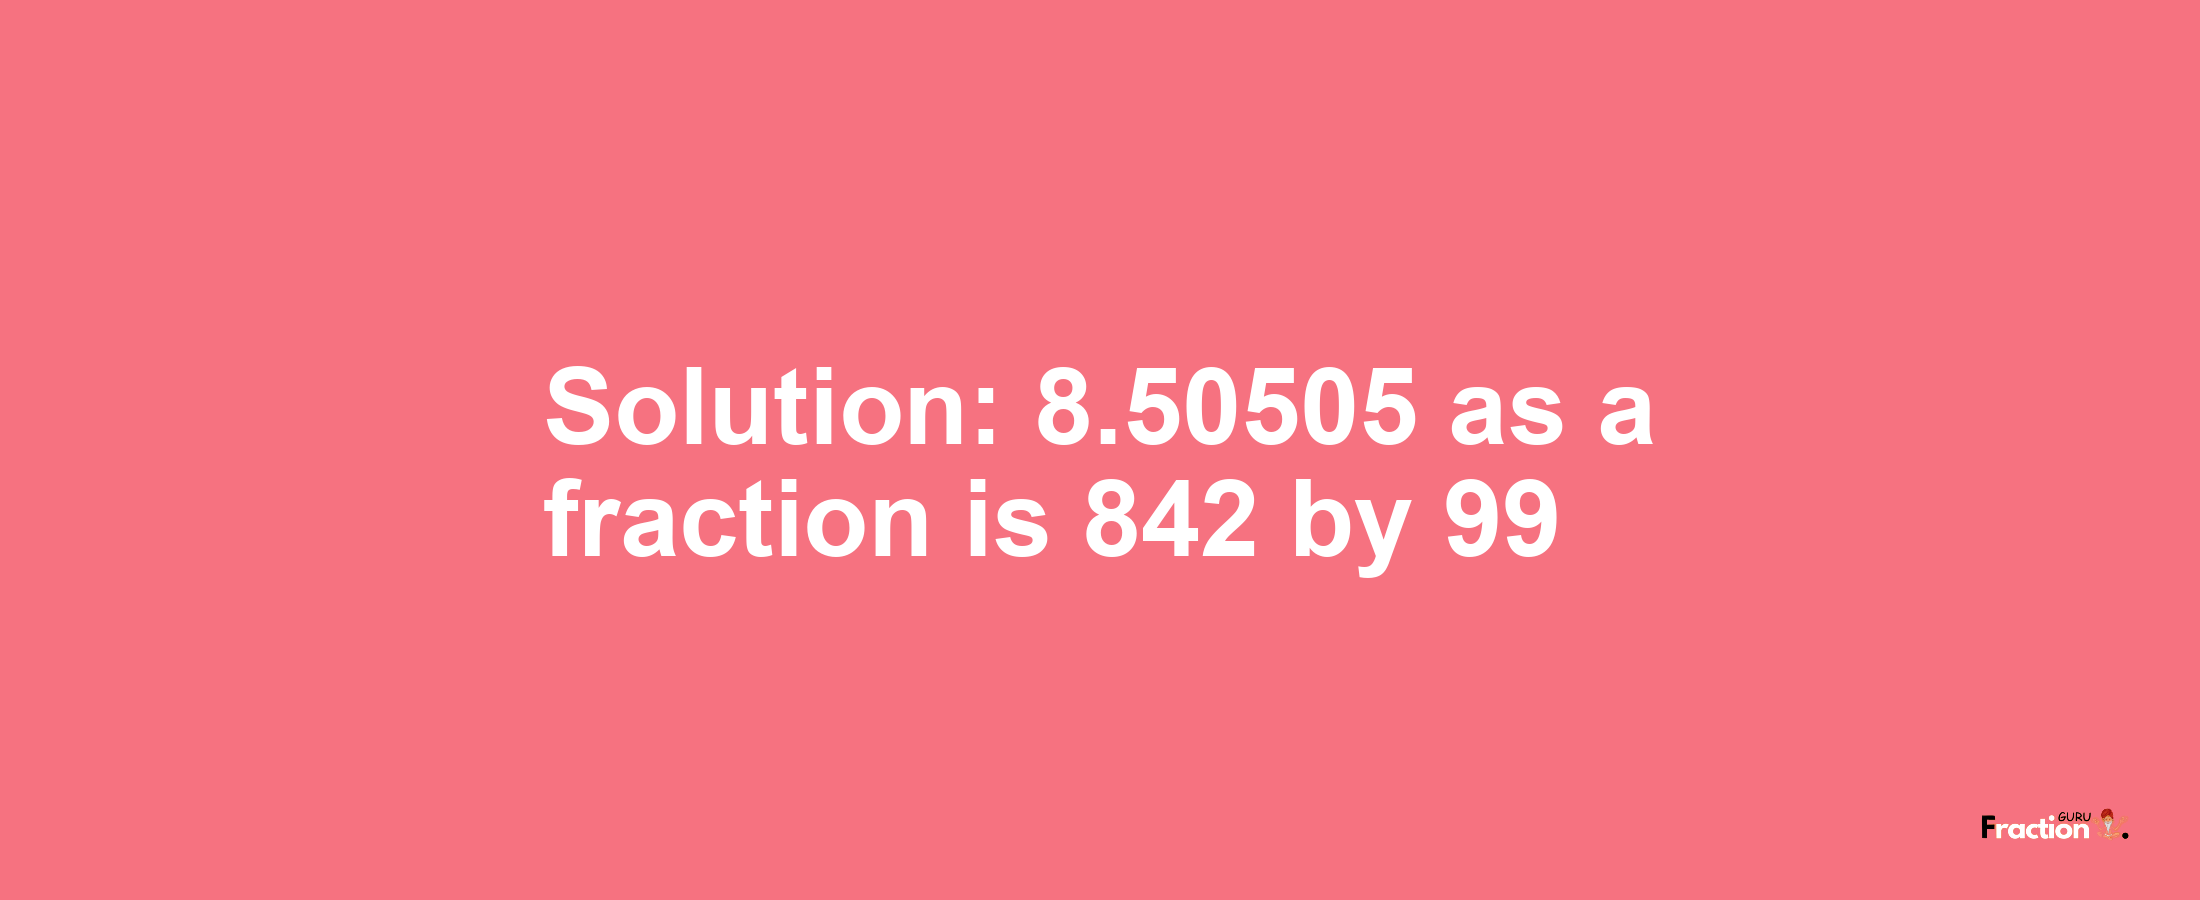 Solution:8.50505 as a fraction is 842/99